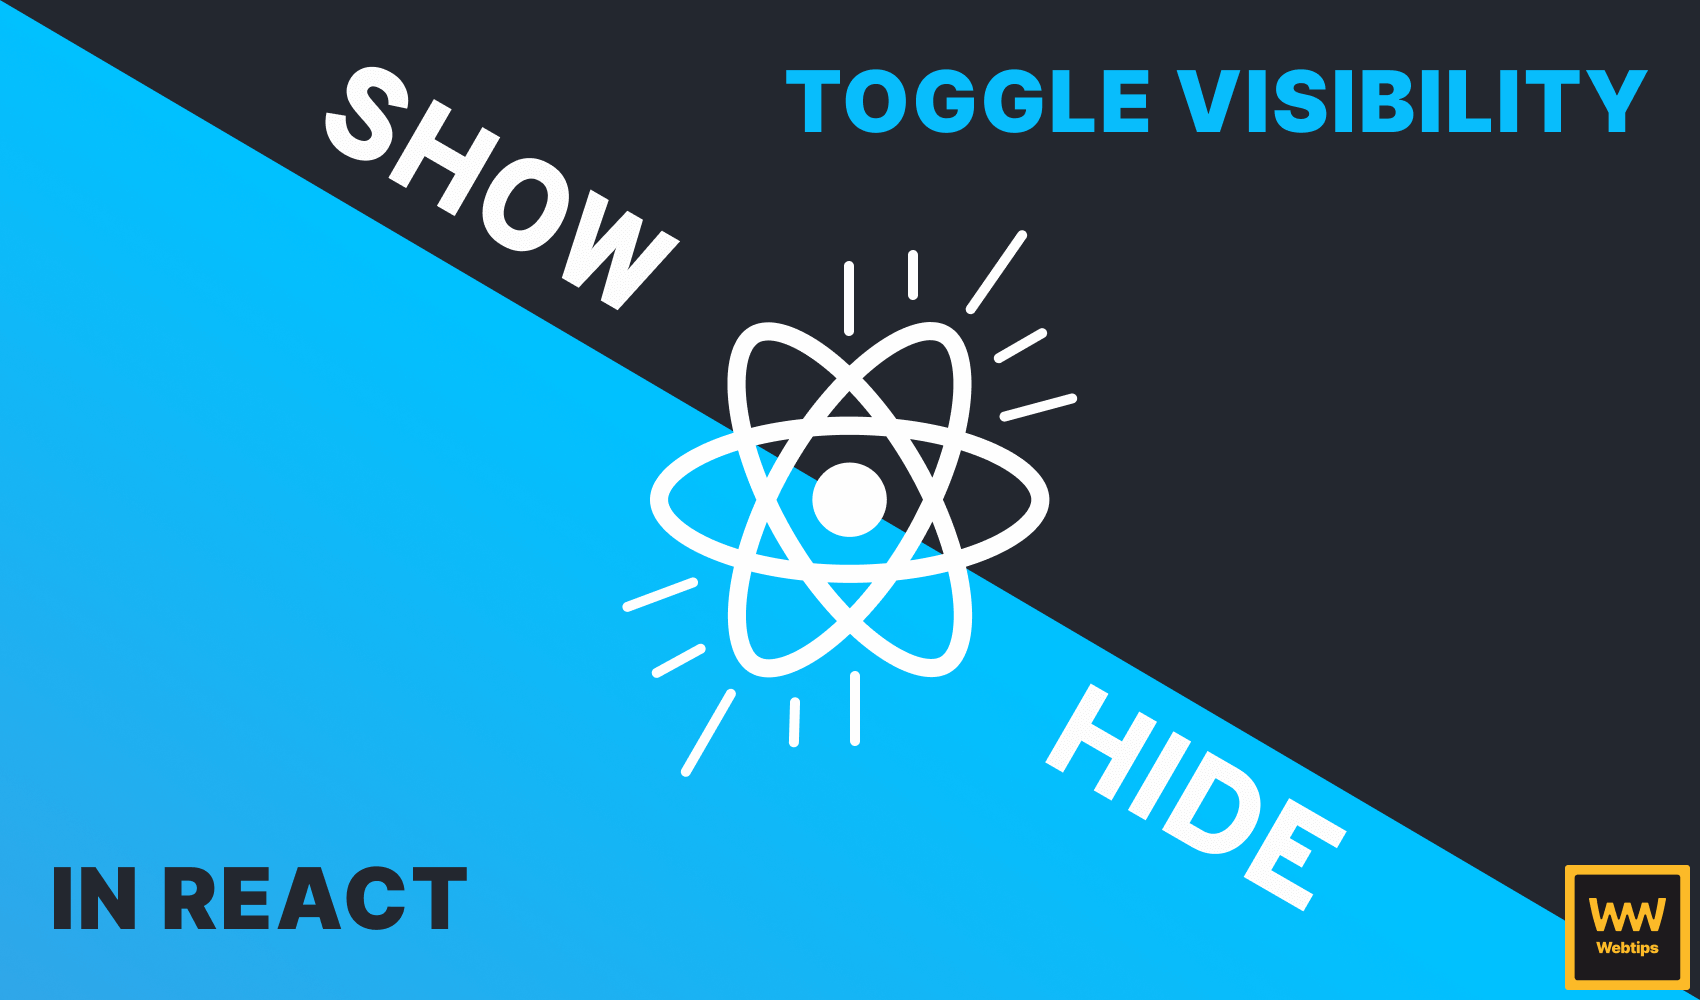 How to Toggle Visibility in React